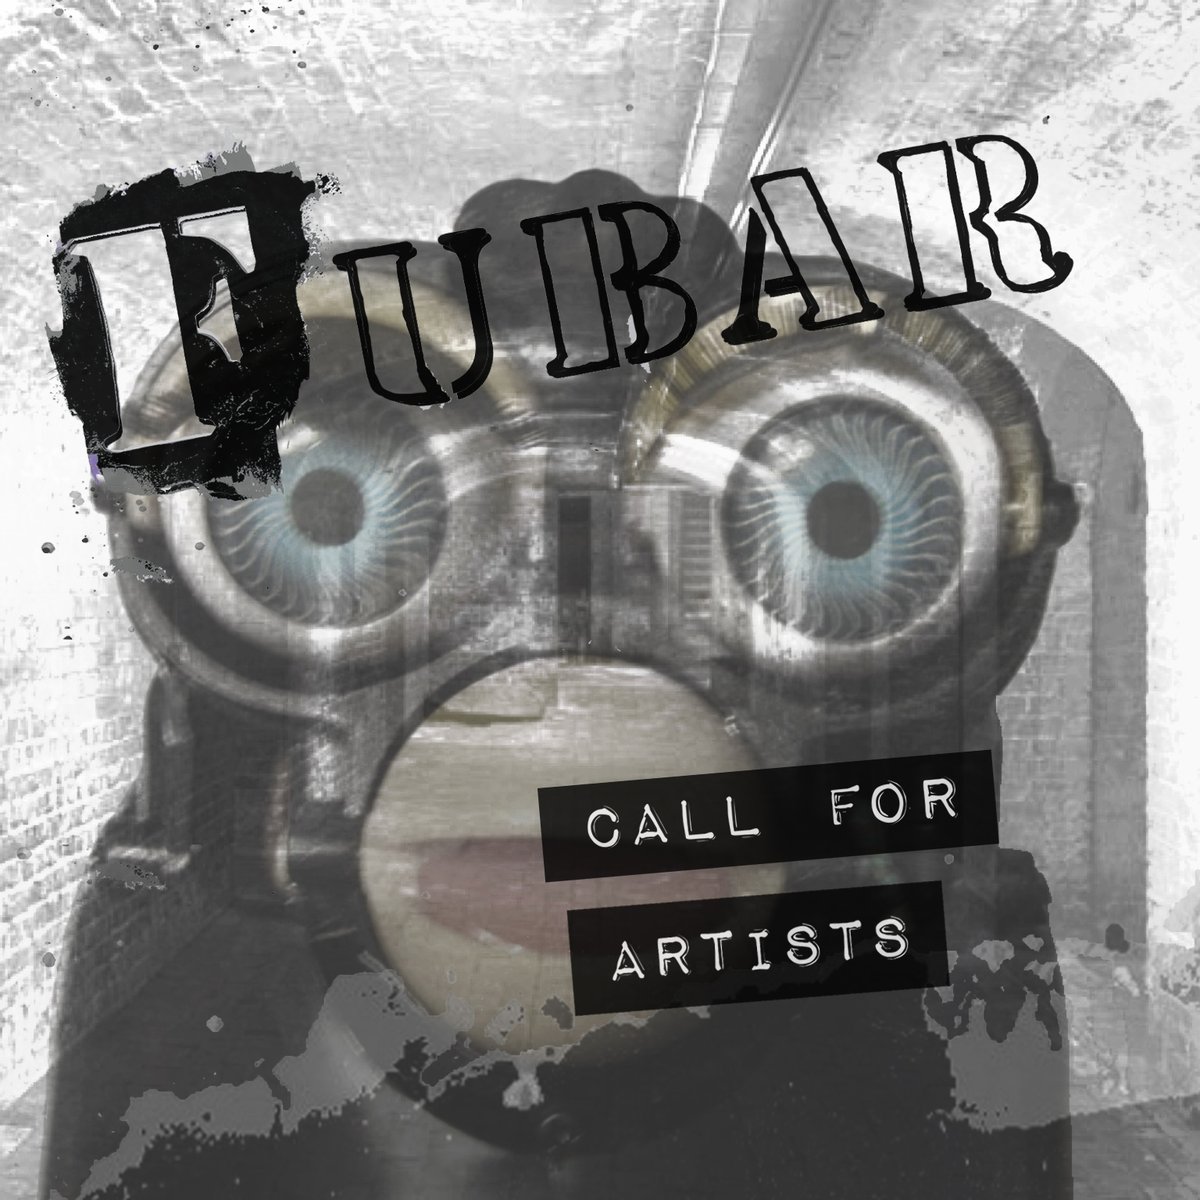 #CallforArtists! We are inviting UK-based artists to respond to the theme of ‘The Absurd’, to participate in a group show at @TheCryptGallery in #London, this August. Full details at fubarcollective.com/absurd-call or via @CuratorSpace here: tinyurl.com/4j5httzb Please share!